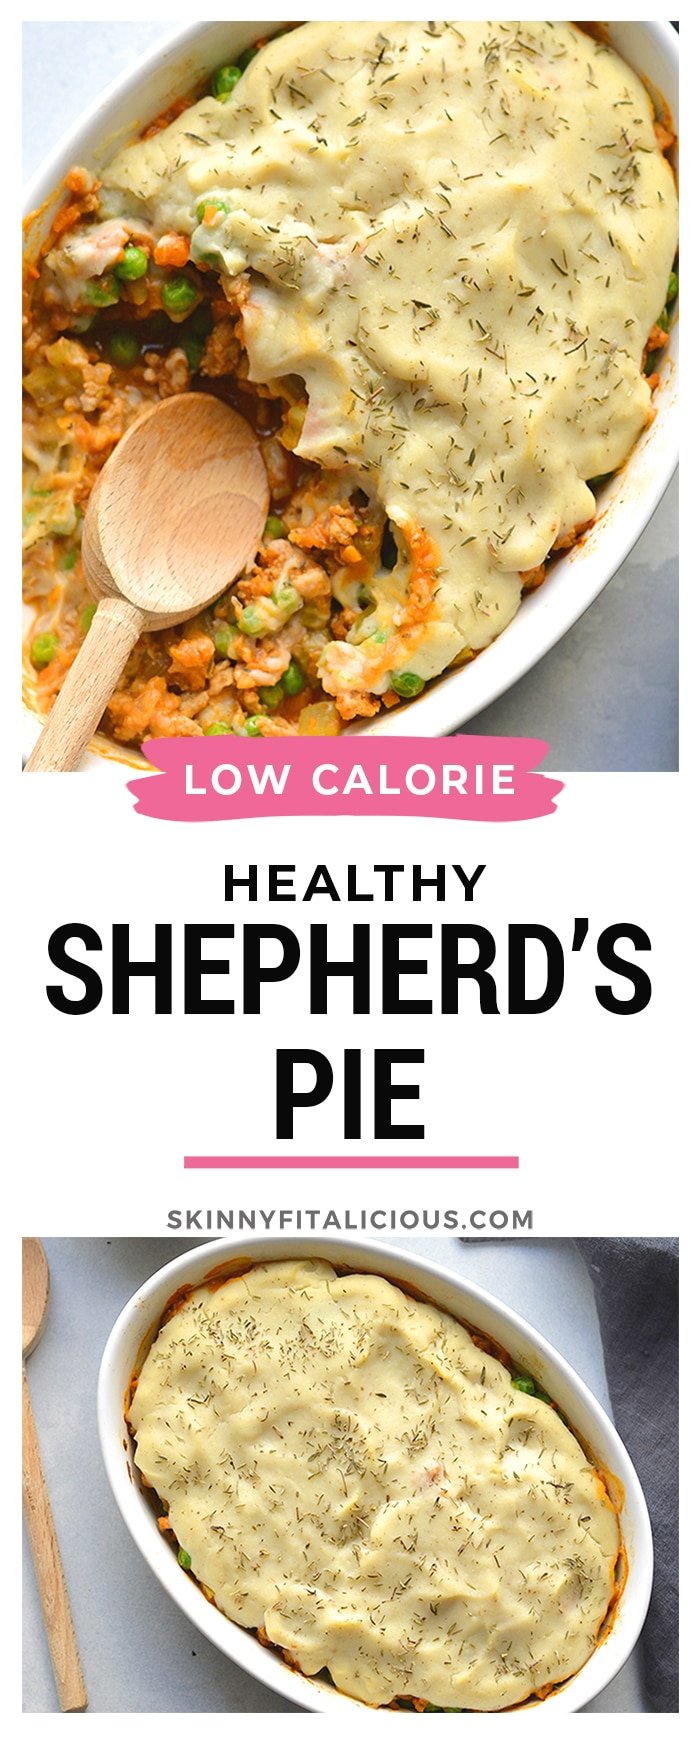 Healthy Shepherd's Pie is a low calorie recipe that's lower in carbs, high in protein and fiber. Made with a delicious roasted garlic cauliflower top and a lighter filling a for a filling and comforting winter meal. Low Calorie + Gluten Free